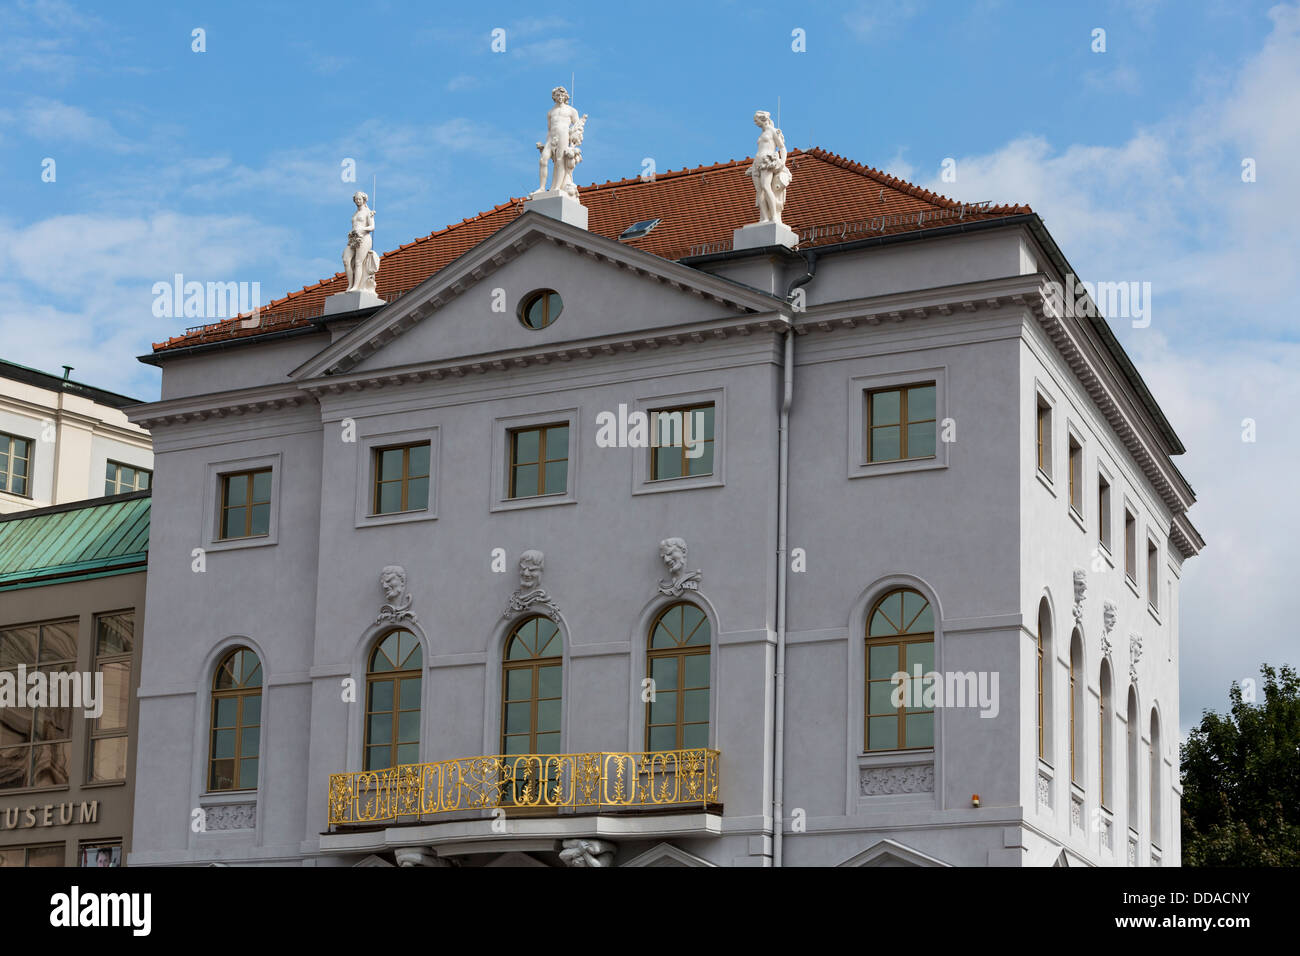 18th century house attached to town hall, Potsdam, Germany Stock Photo